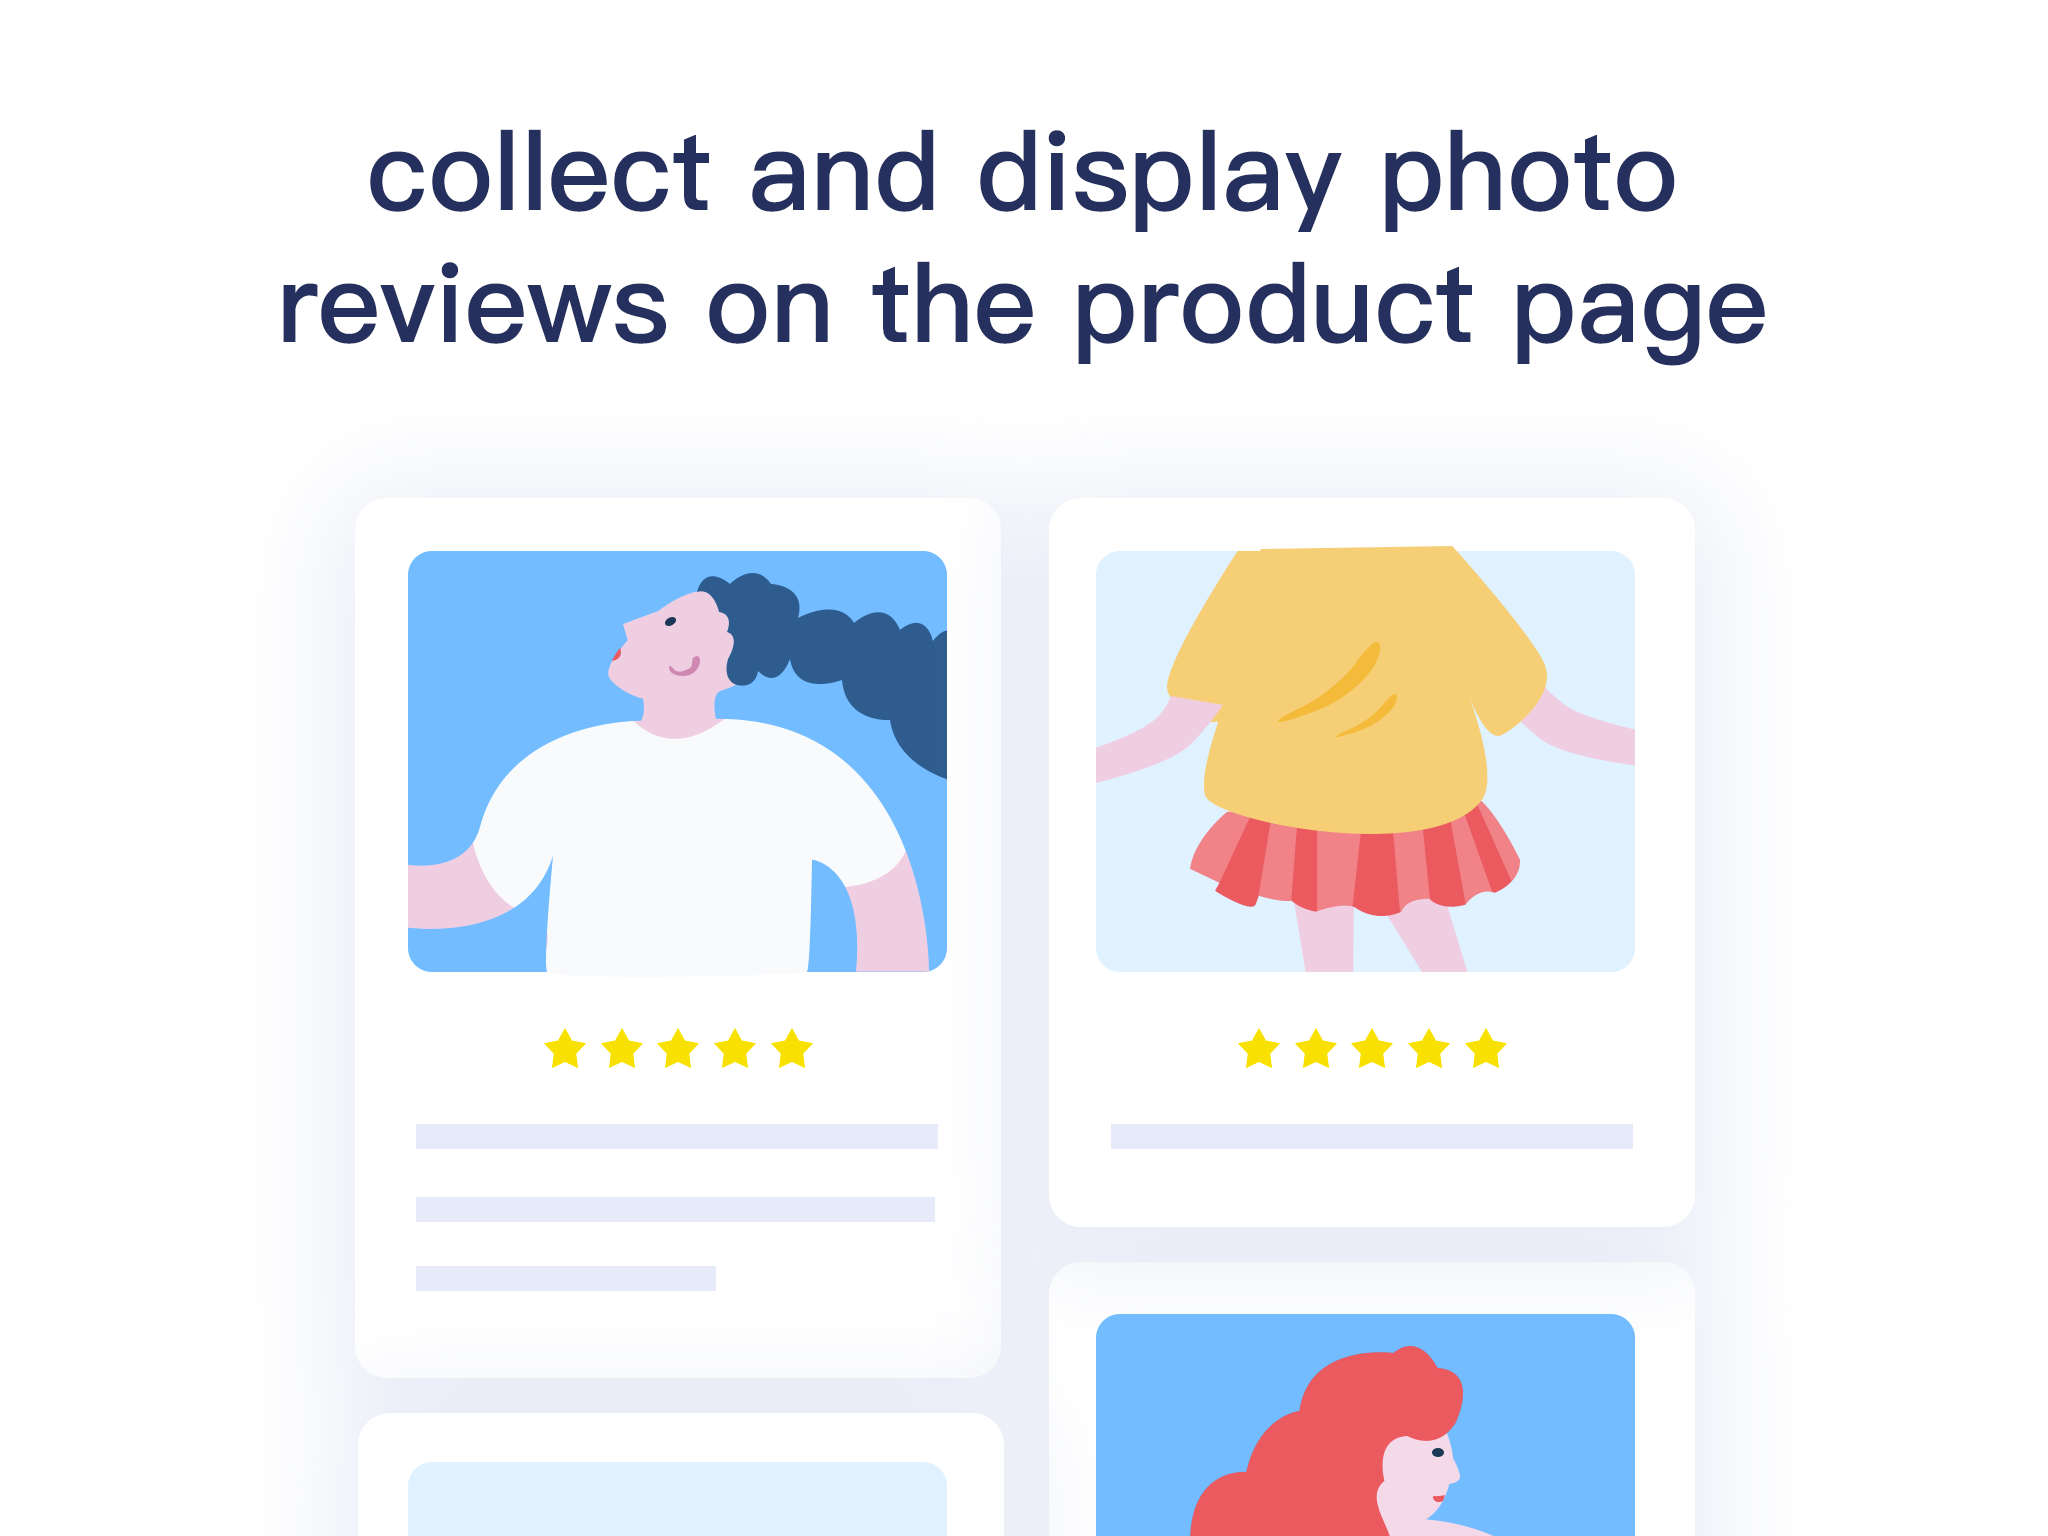 Display photo reviews, while allowing customers write a review.